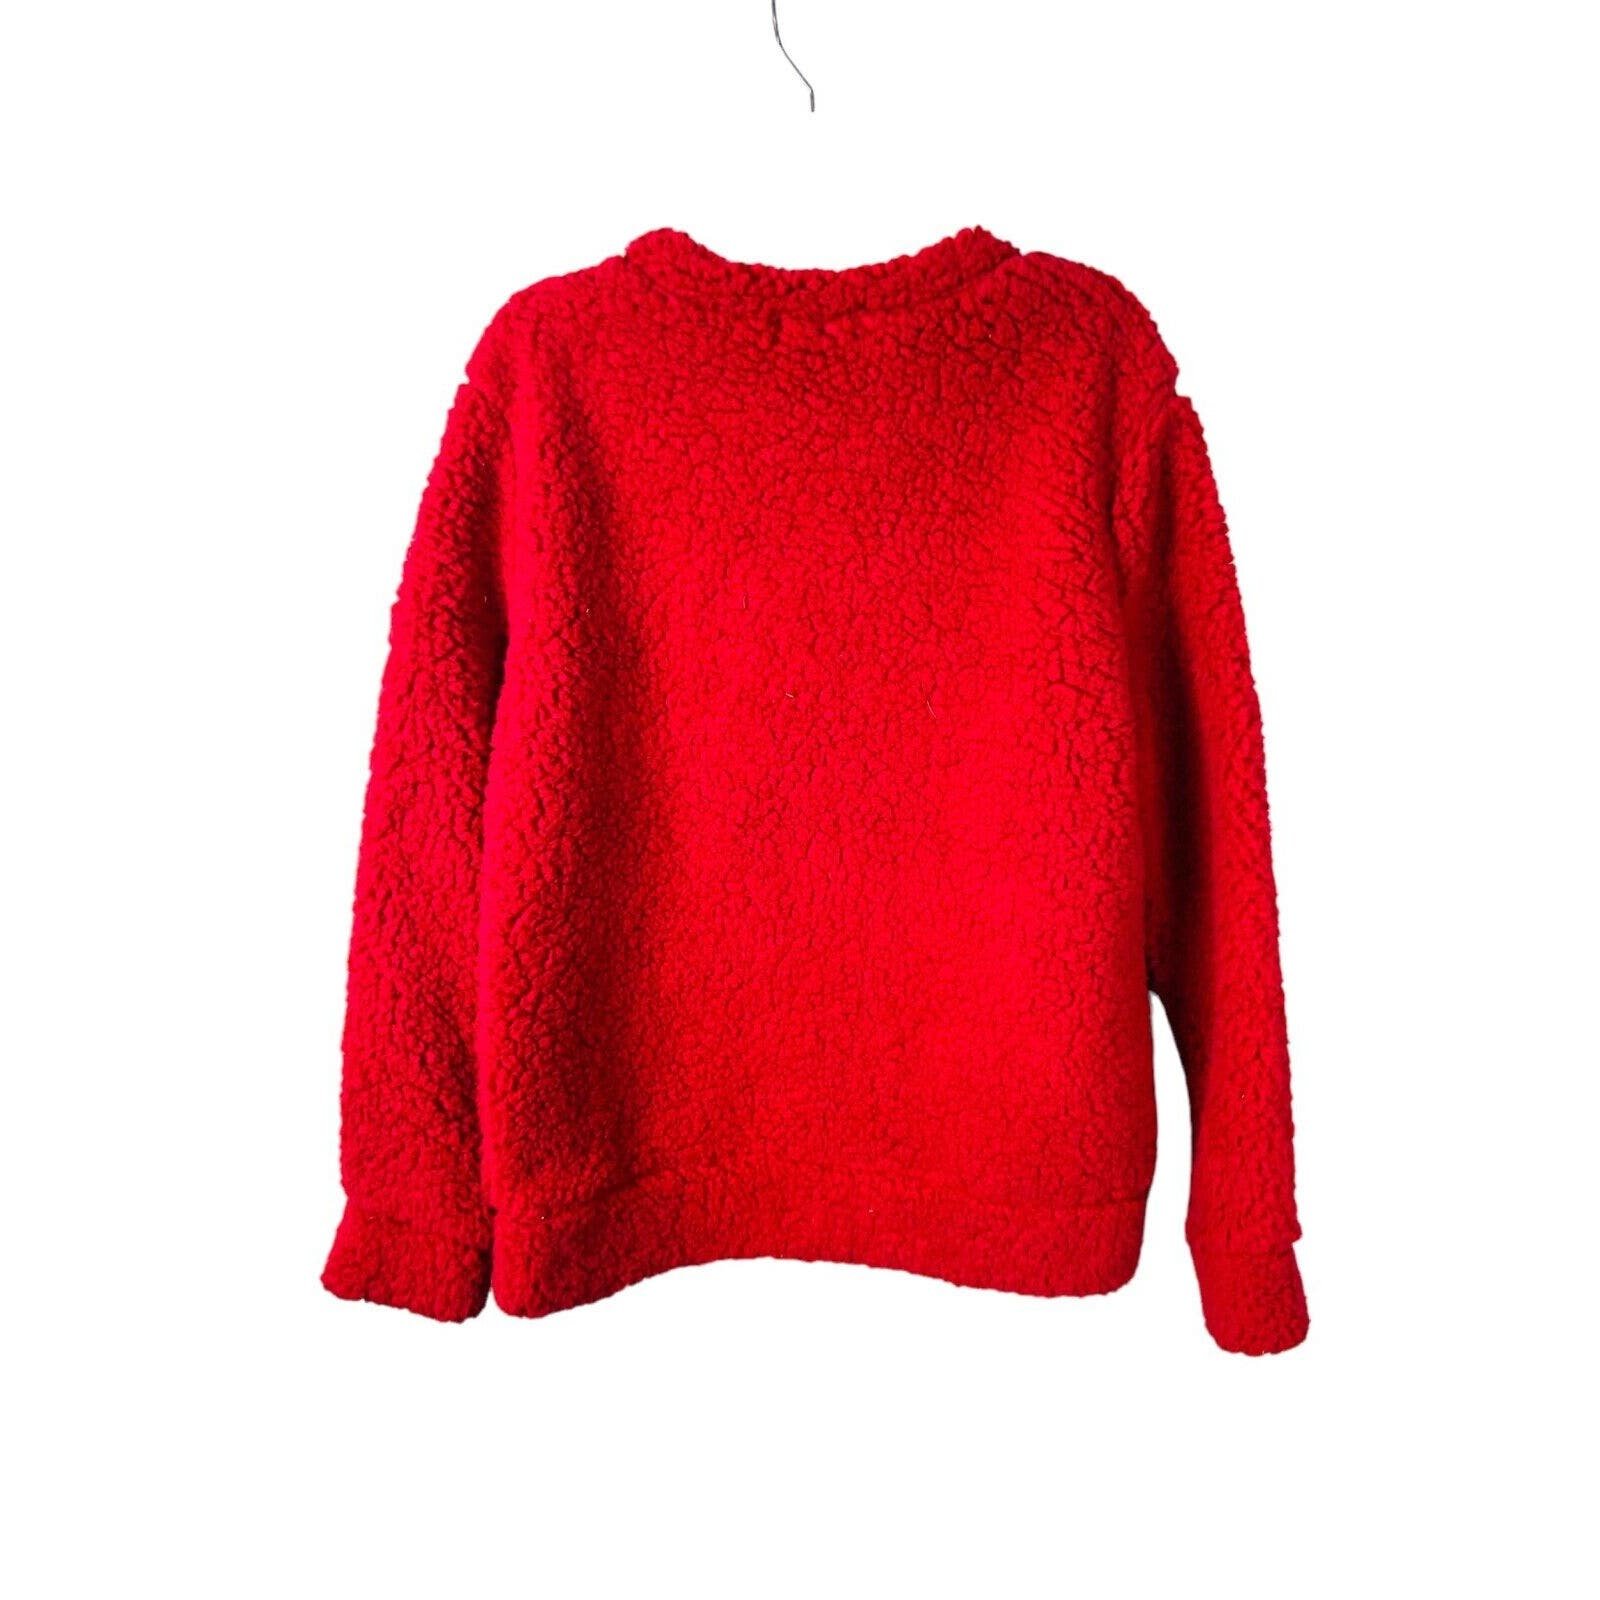 Classic Chance or Fate Womens Pullover Sweater Crew Neck Long Sleeve Red Size Small NWT G39EejYfG US Sale